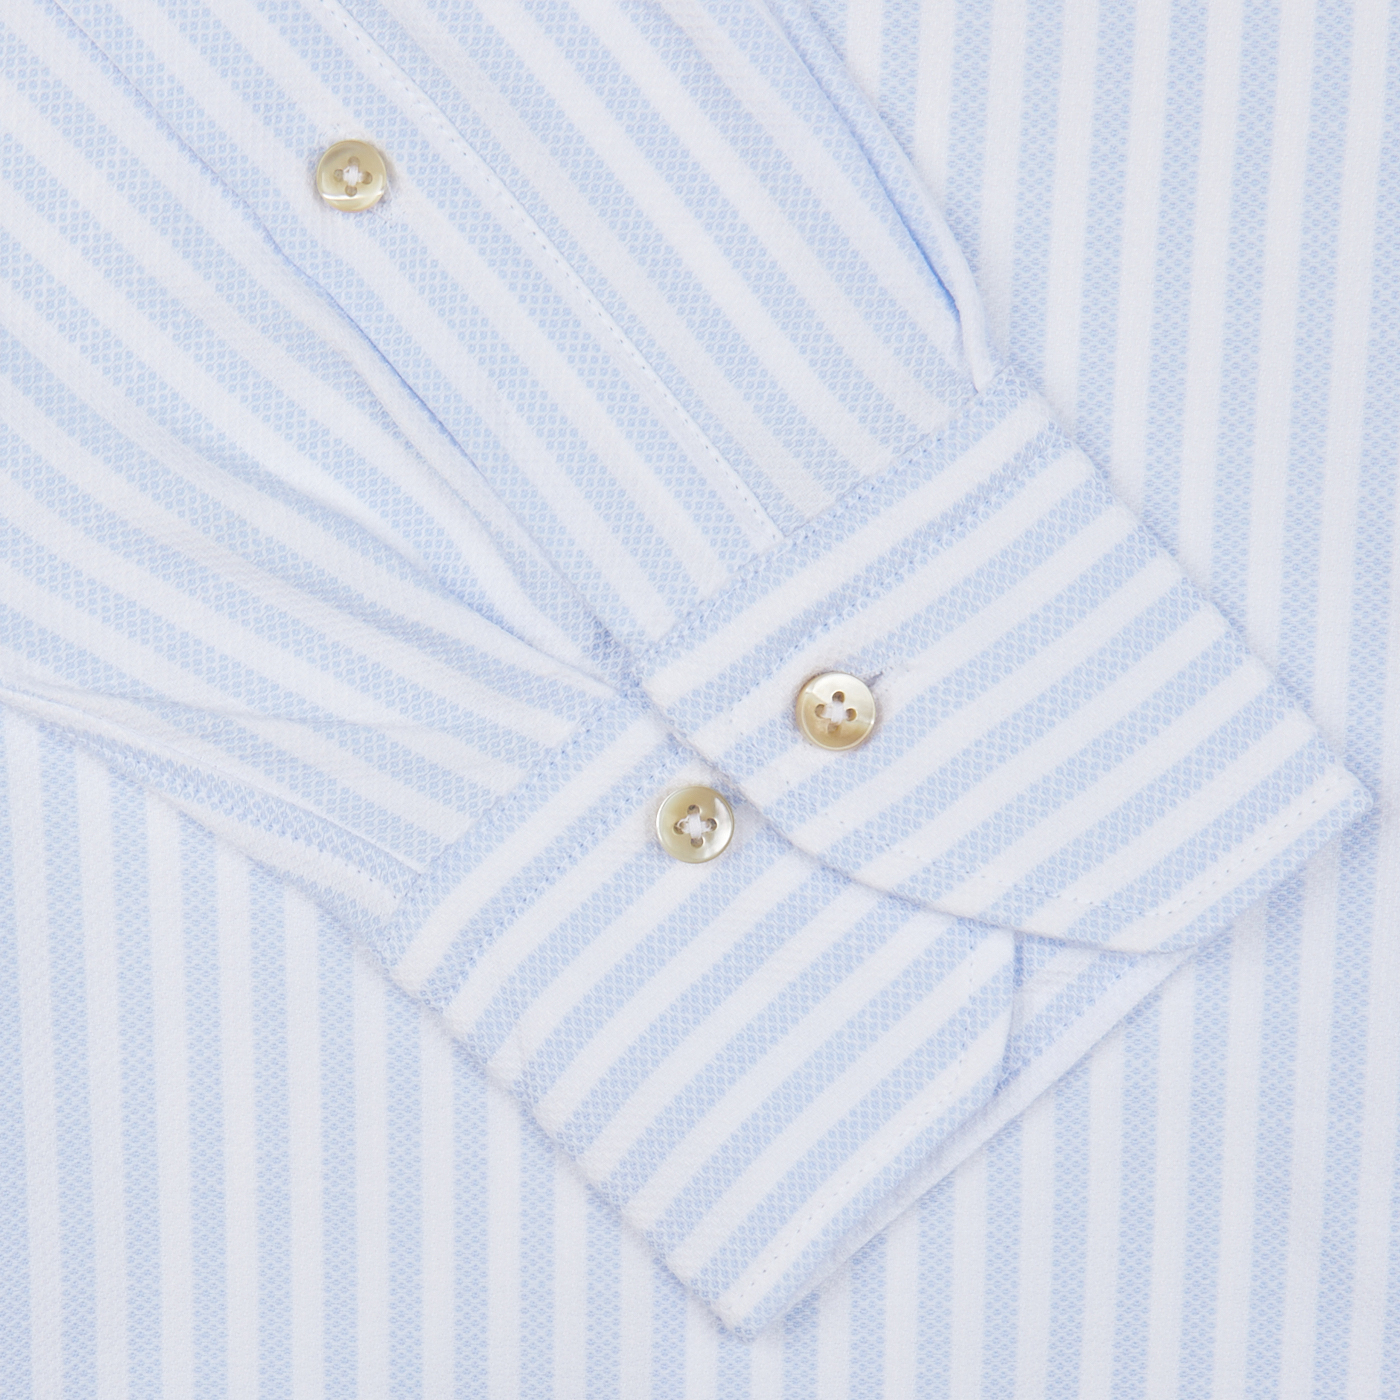 Close-up of a blue and white striped Stenströms Slimline shirt cuff with two buttons.